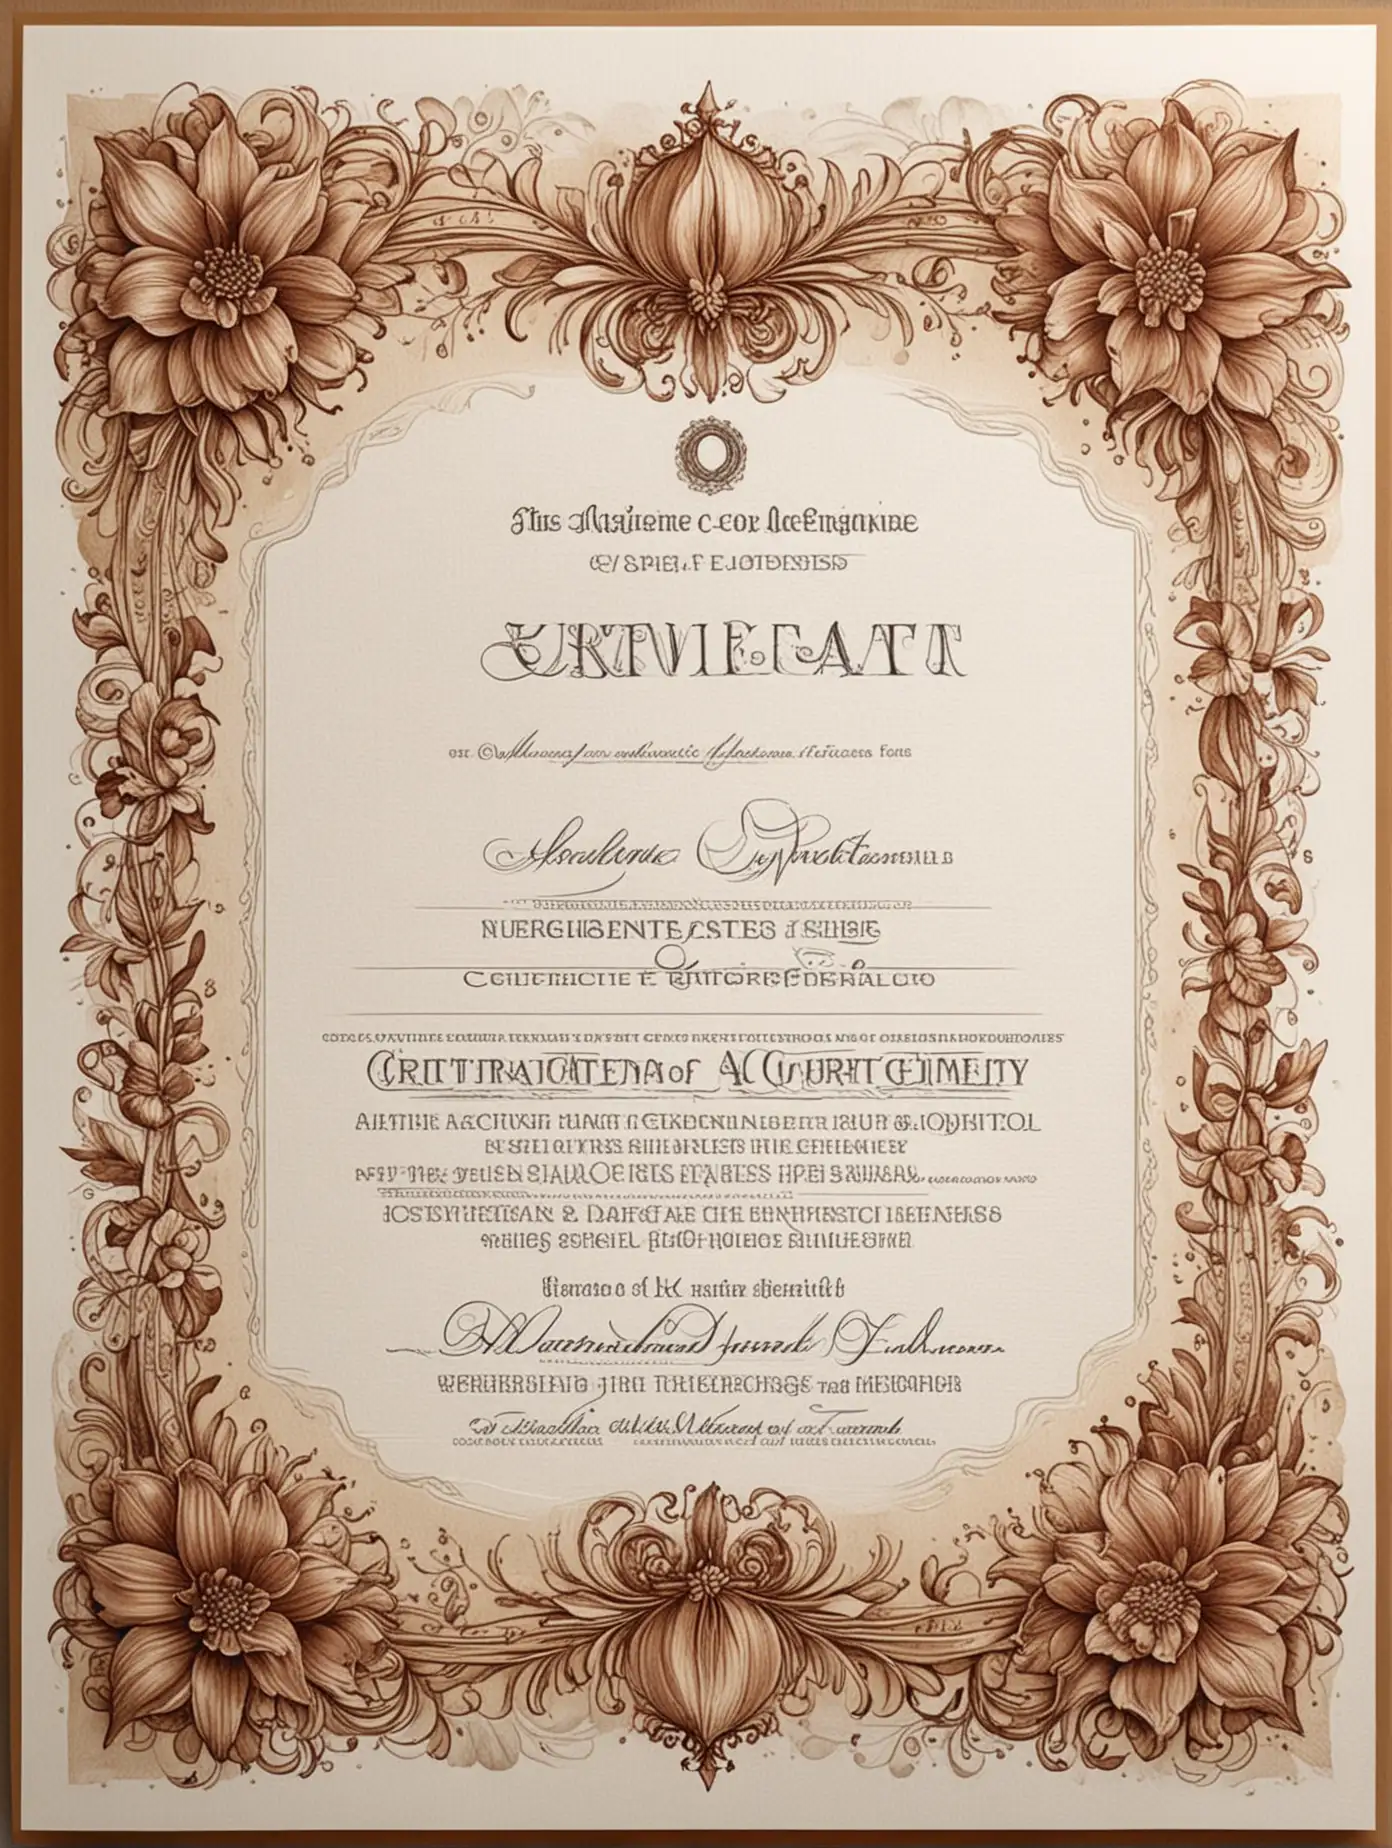 Blank Certificate of Authenticity for Artists